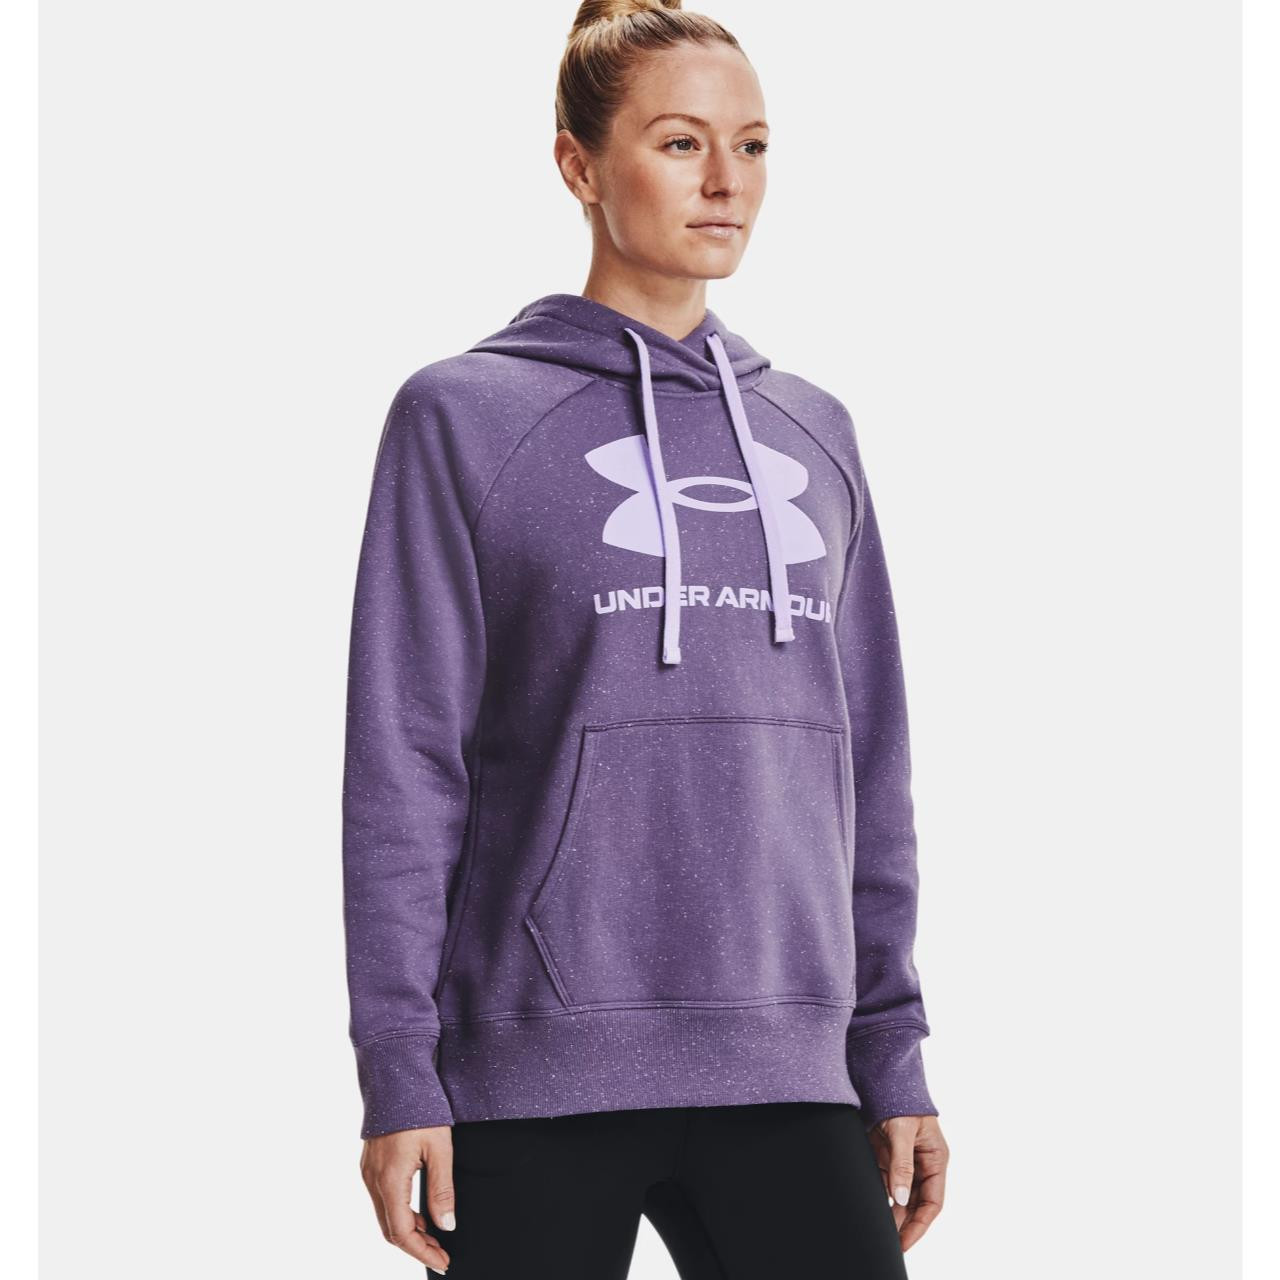 https://cdn11.bigcommerce.com/s-stfpjhht/images/stencil/1280x1280/products/23351/46978/Under-Armour-Women-s-UA-Rival-Fleece-Logo-Hoodie-1356318-195251435609_image1__07658.1673644209.jpg?c=2